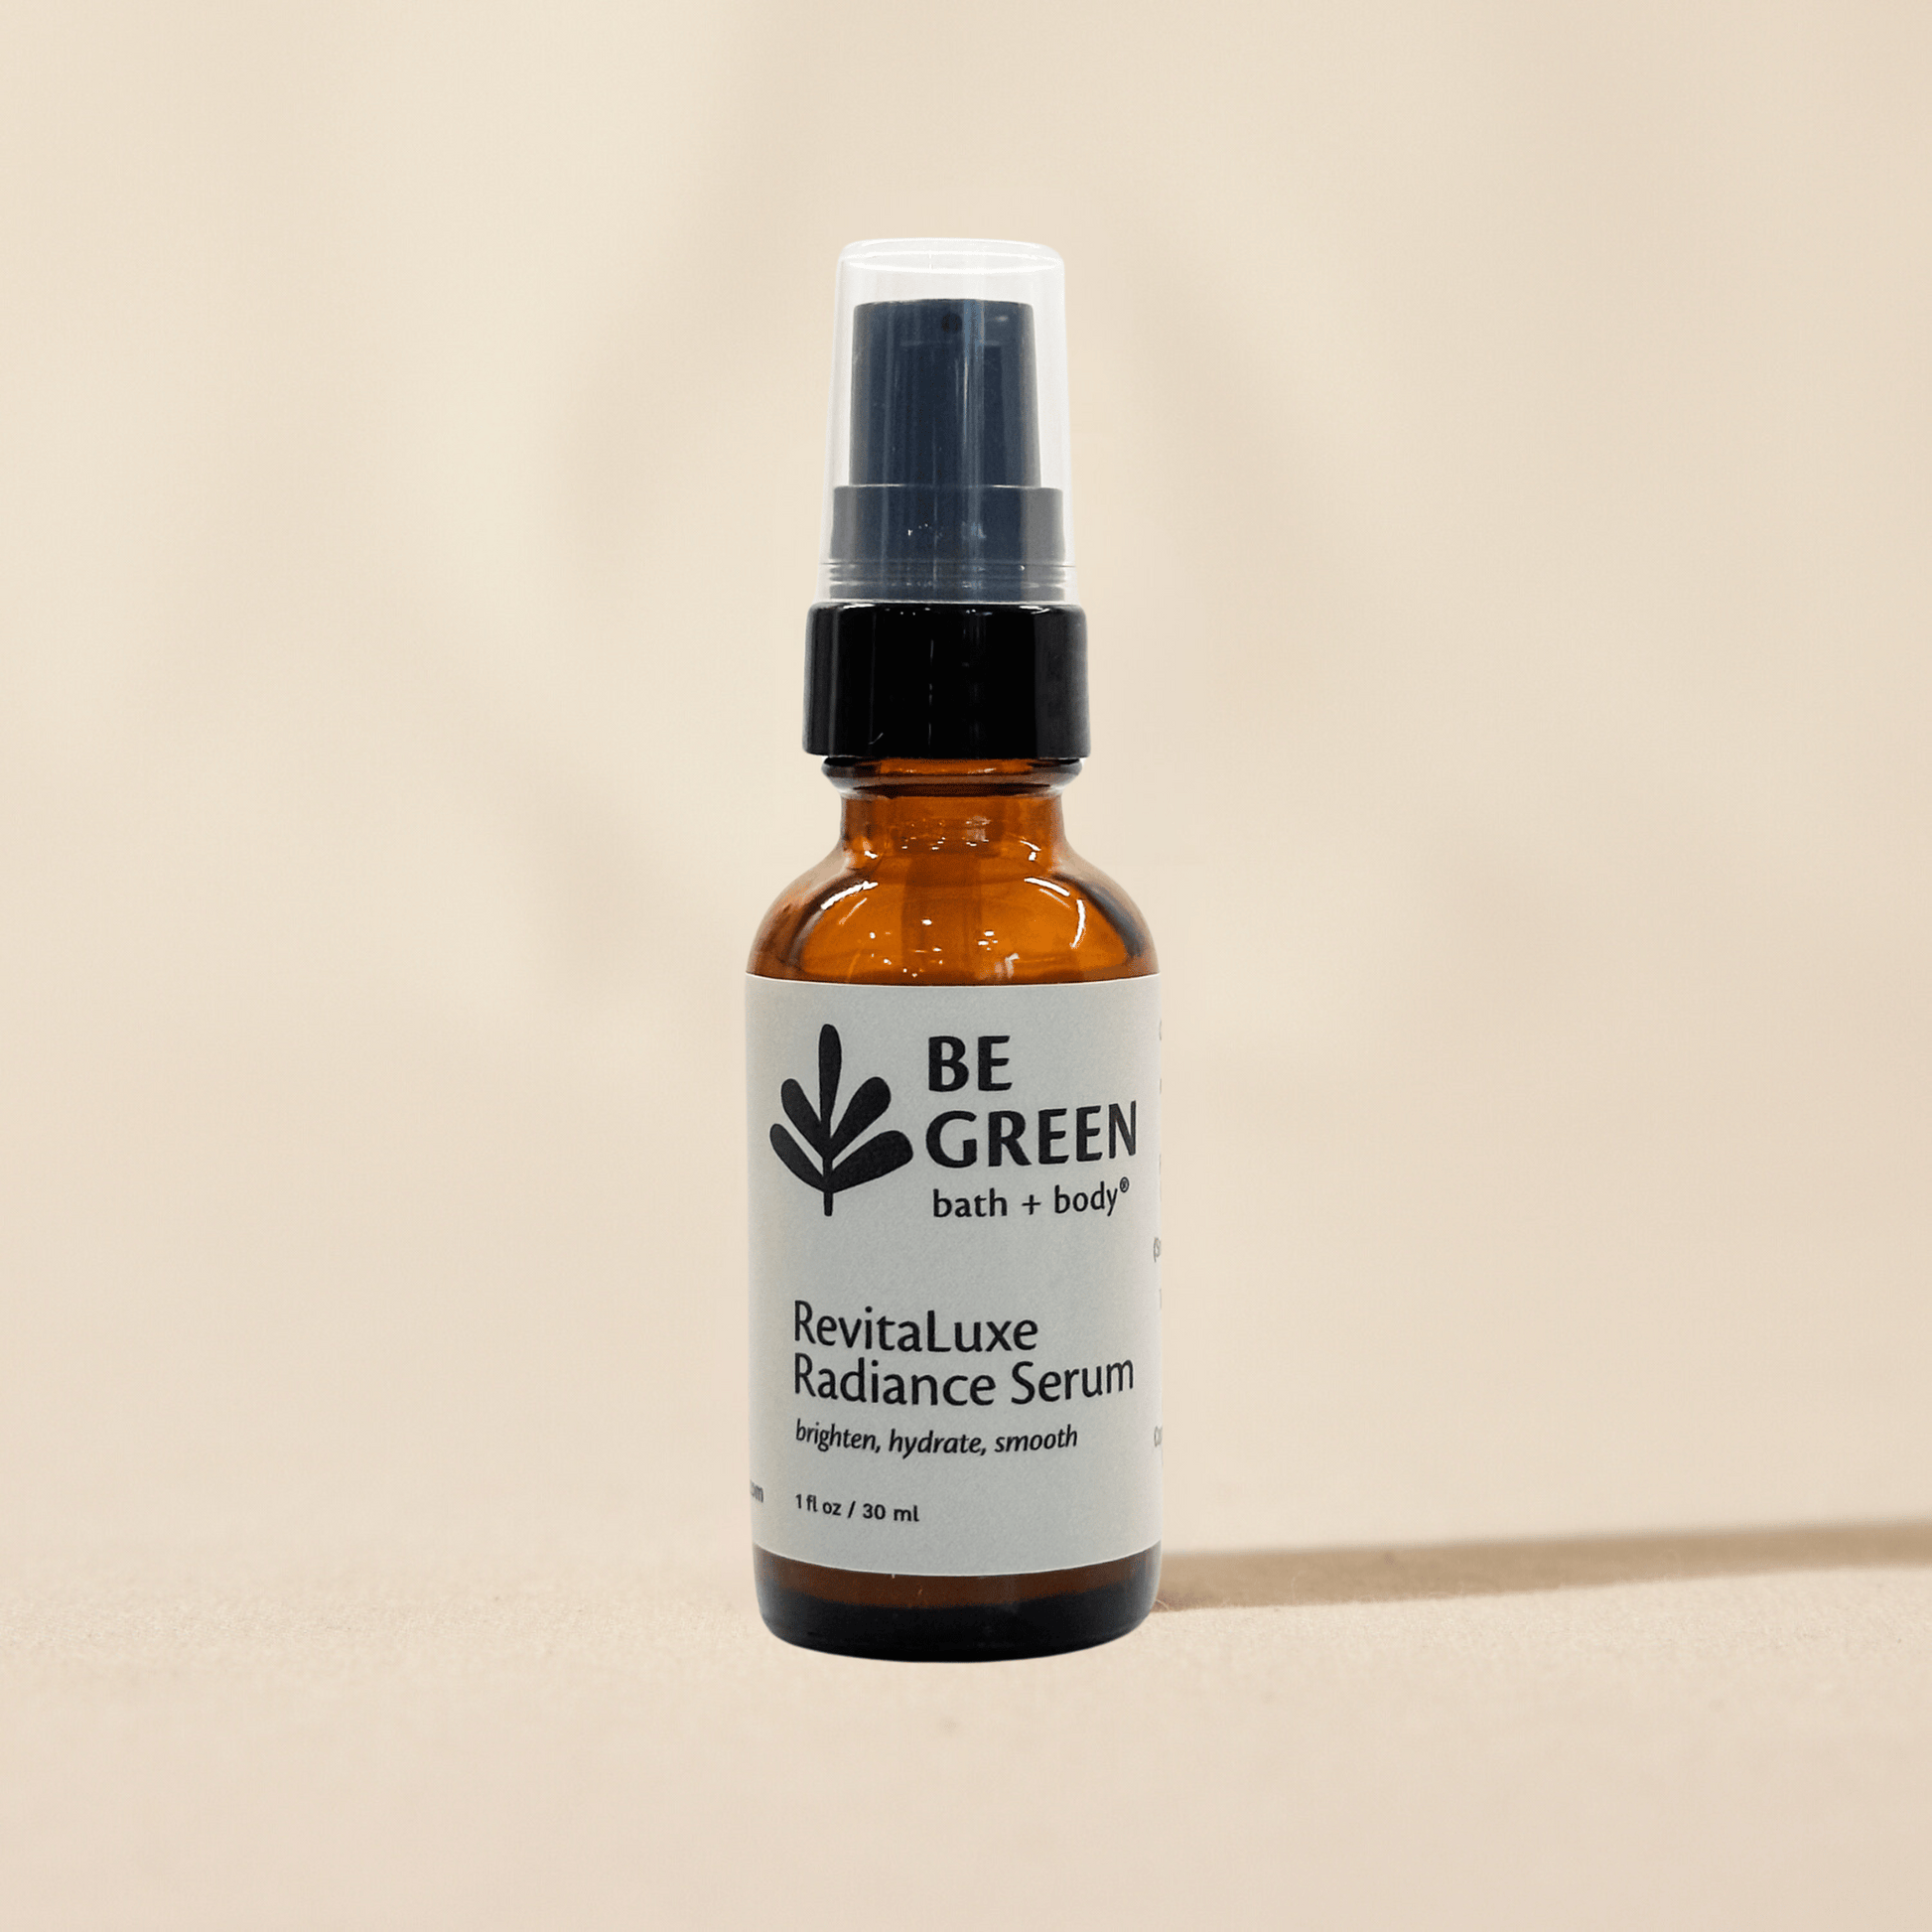 All in one facial serum for sensitive skin with vitamin C, hyaluronic acid and nicacinamide